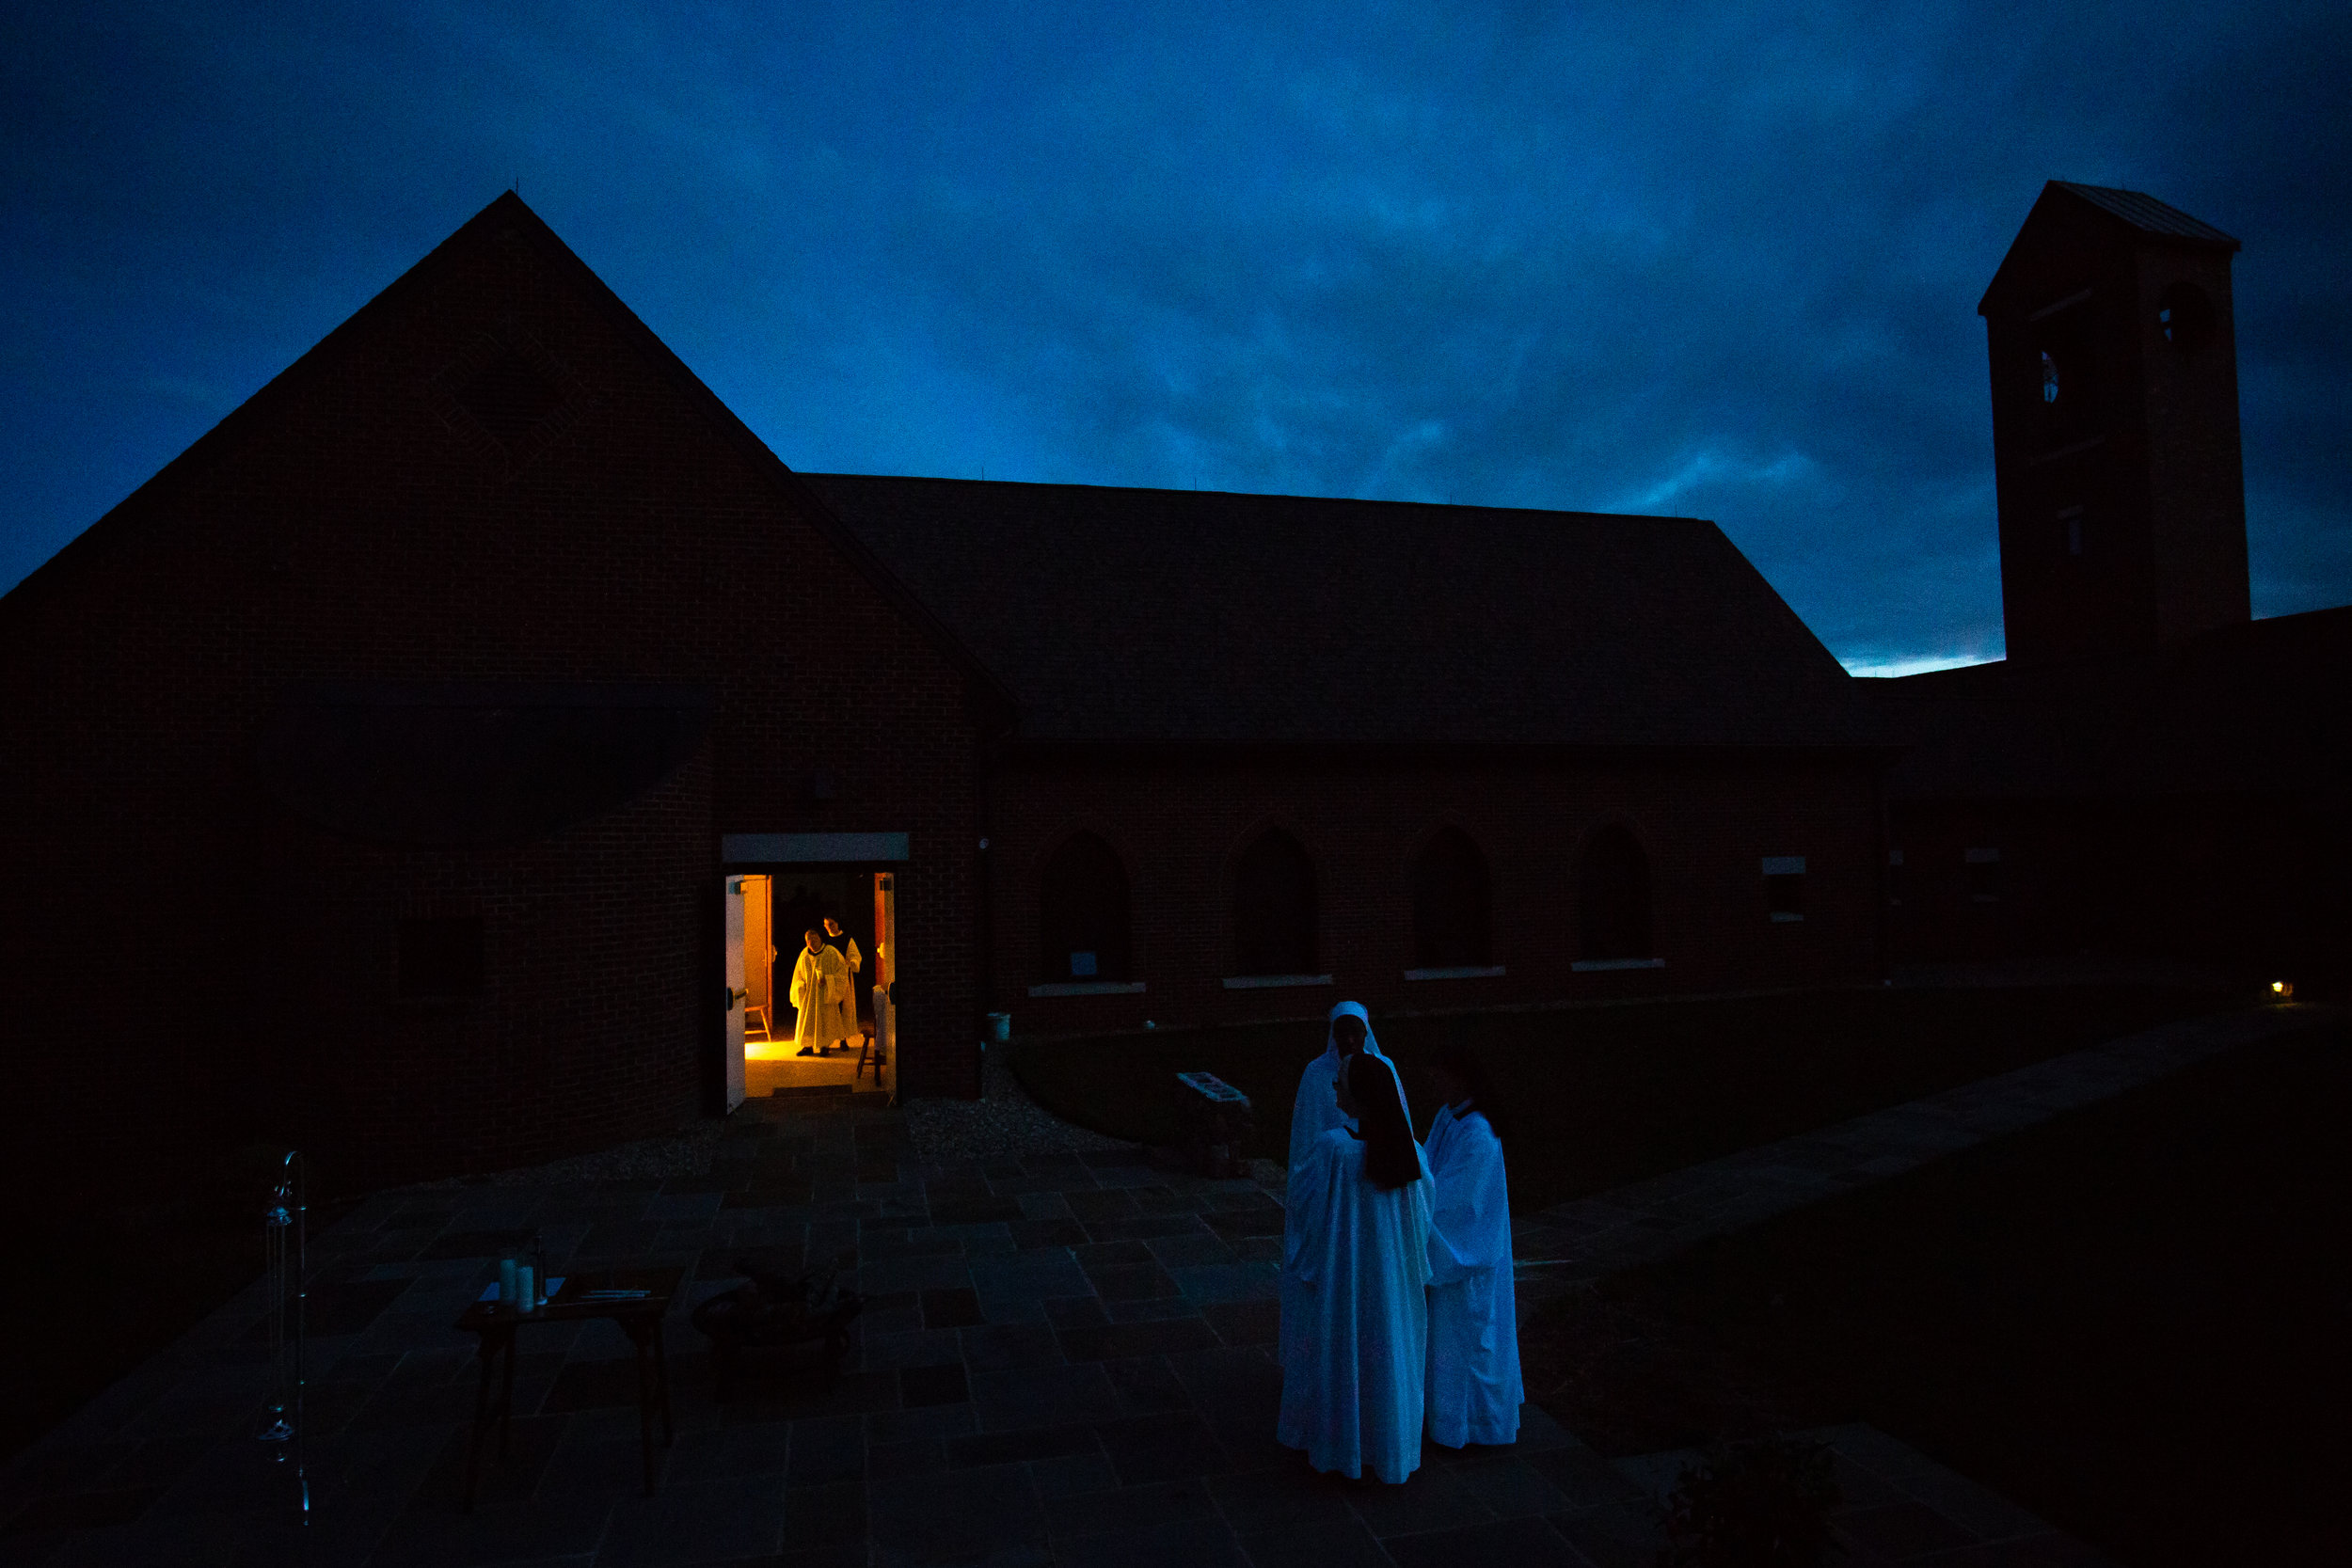  The sisters prepare the patio with candles and a fire for Easter service Saturday evening April 20, 2019 in Crozet, Virginia. Once the guests arrive this begins their procession into the church for Easter mass. 